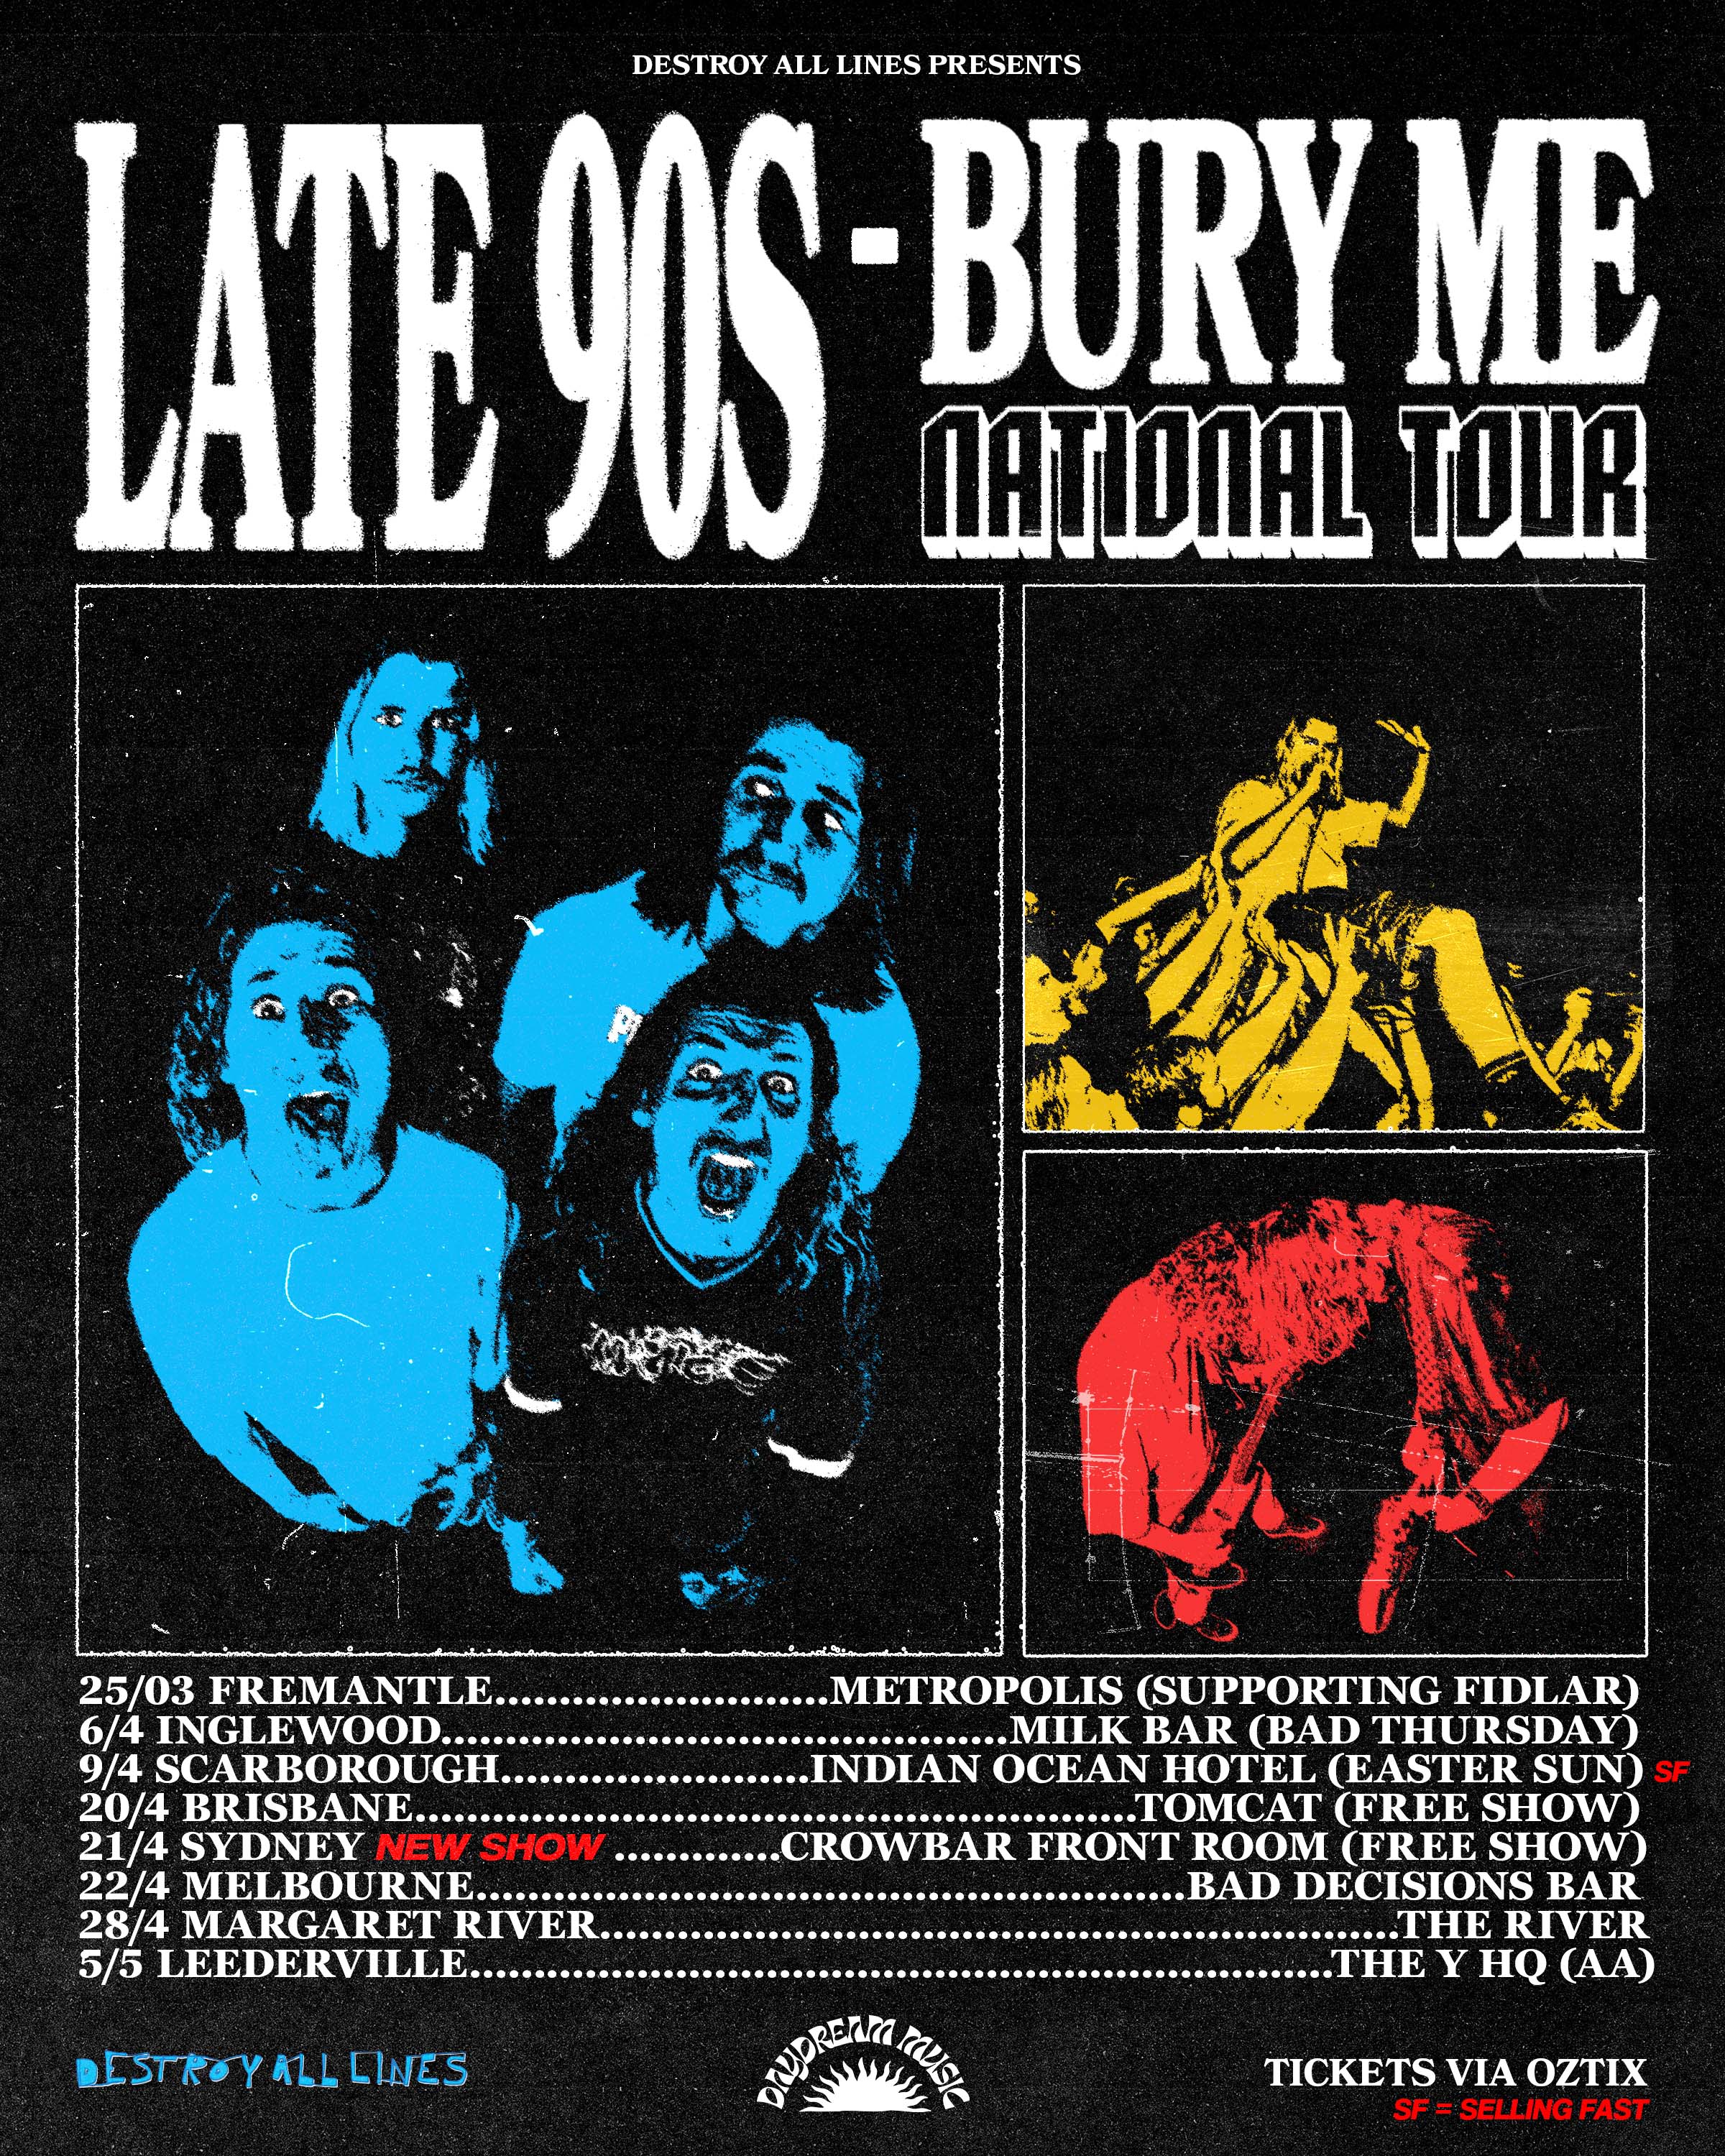 Late 90's Bury Me Poster